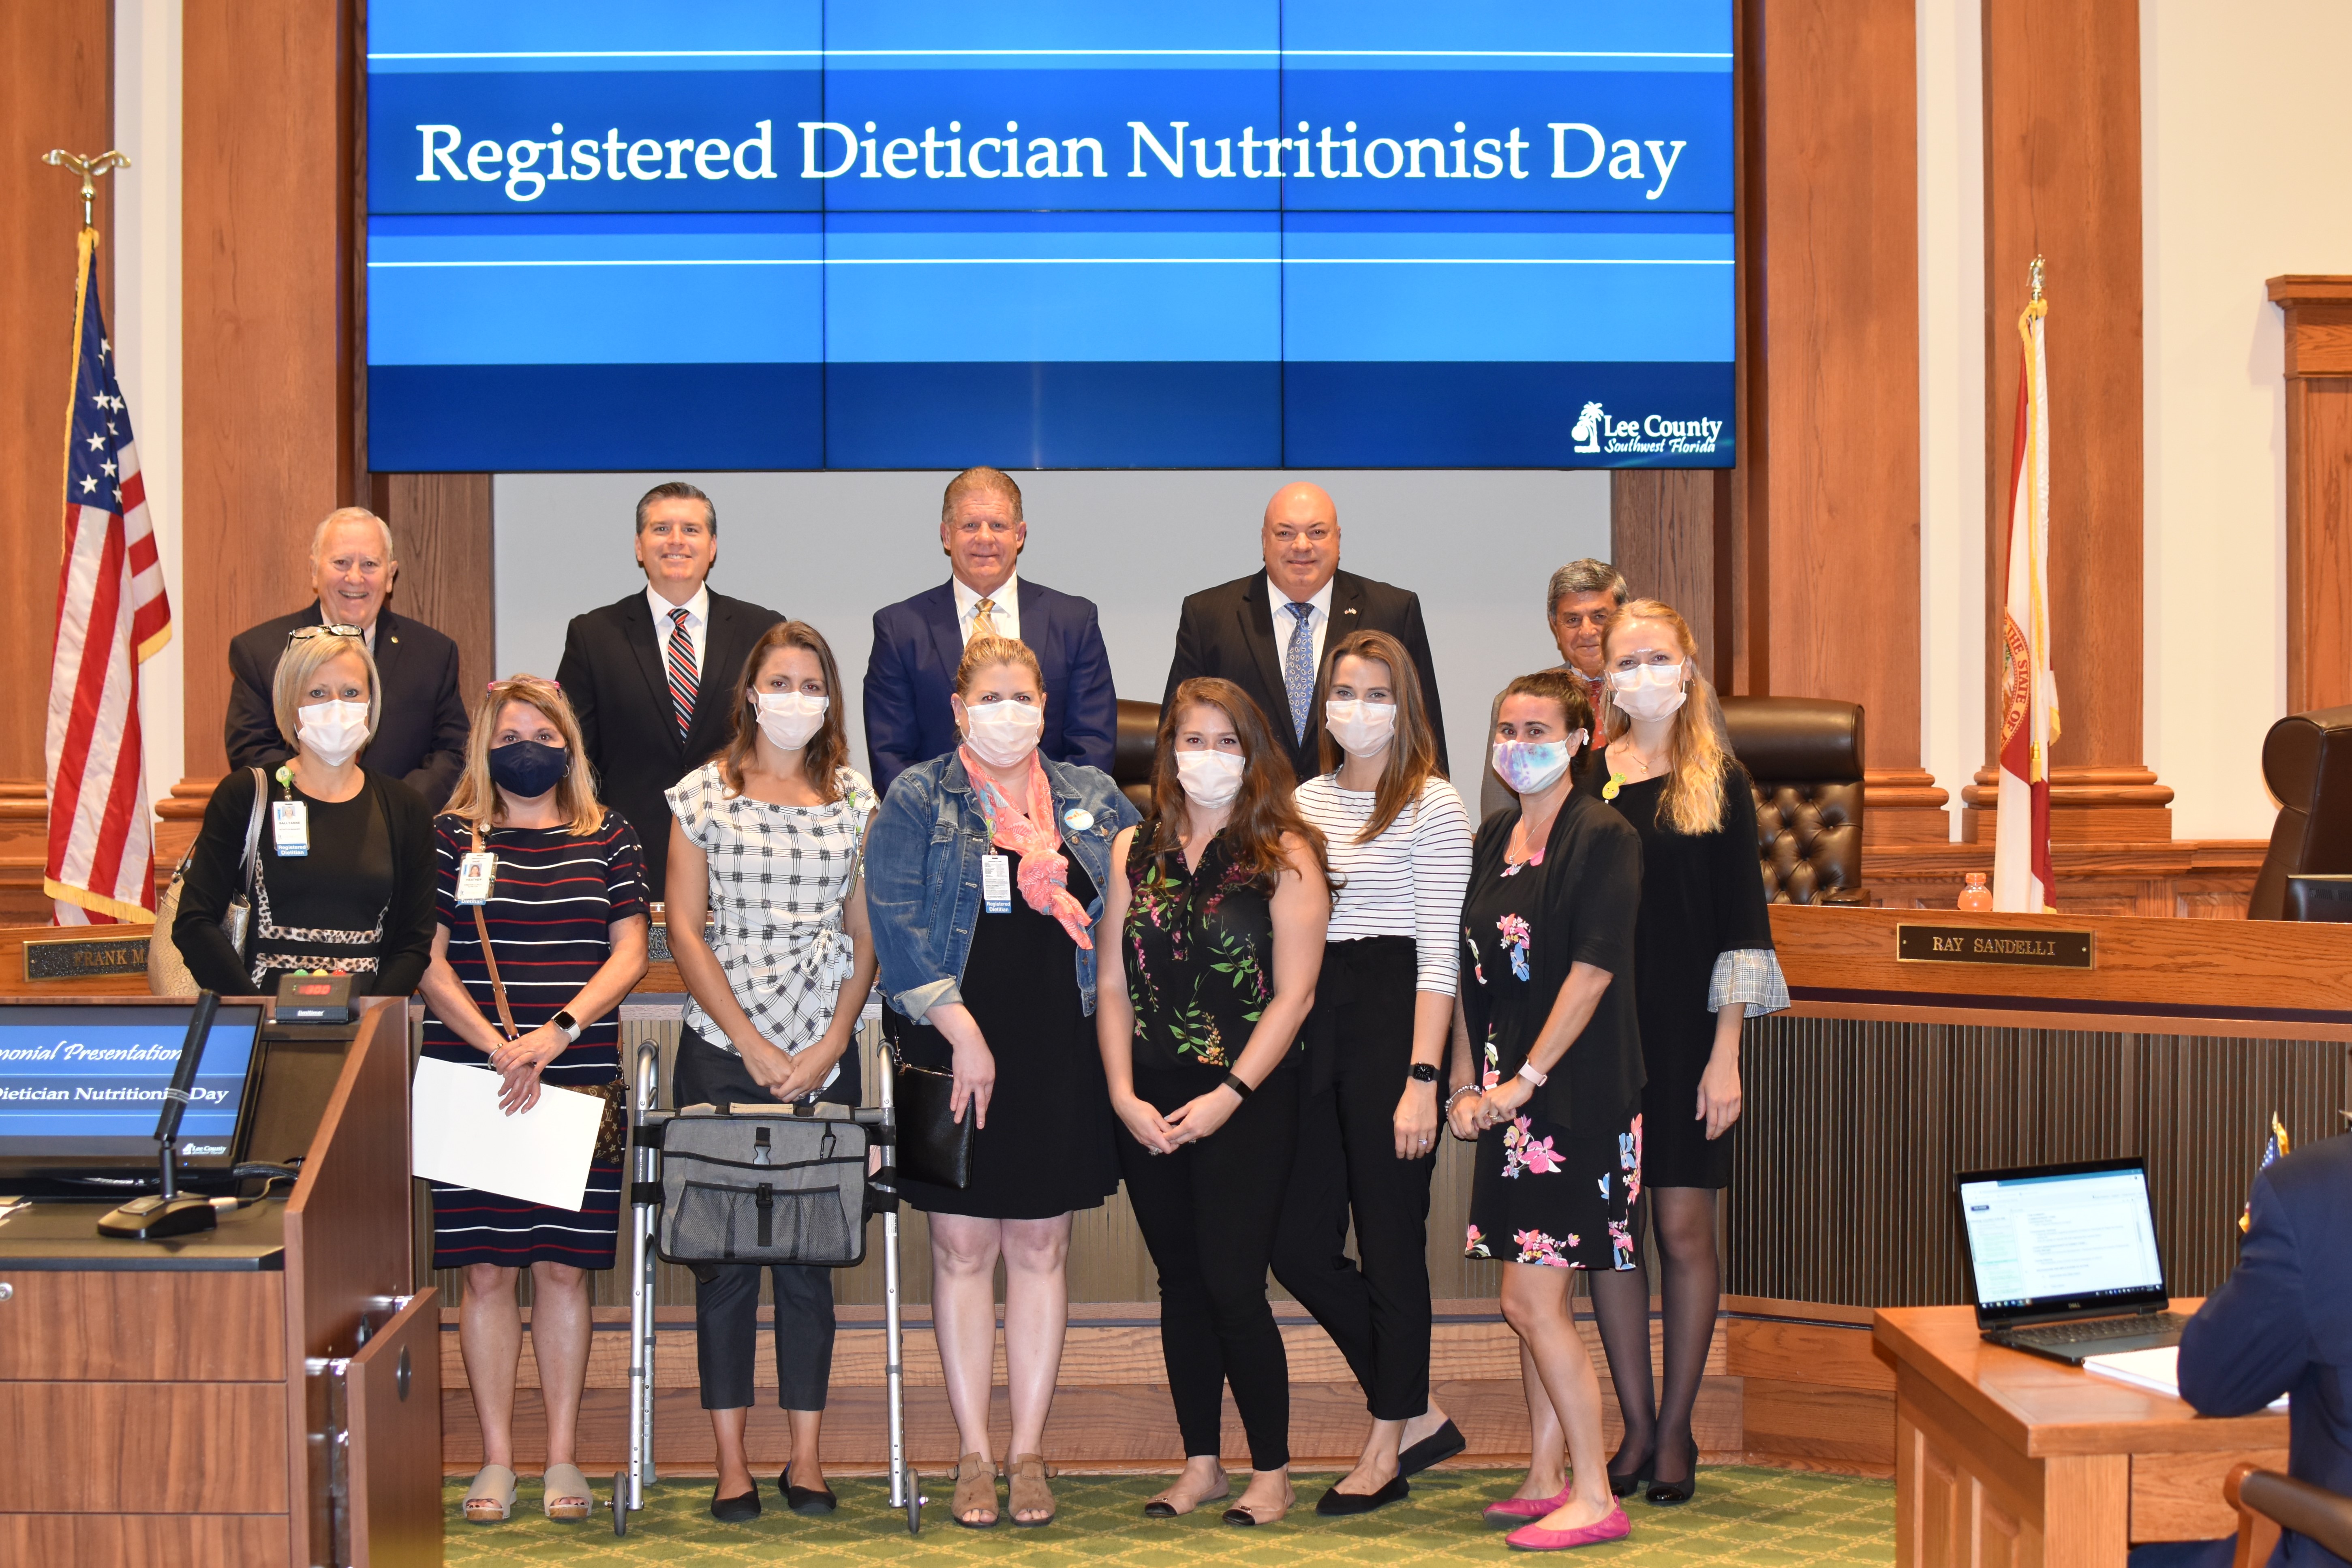 Registered Dietitian Nutritionist Day